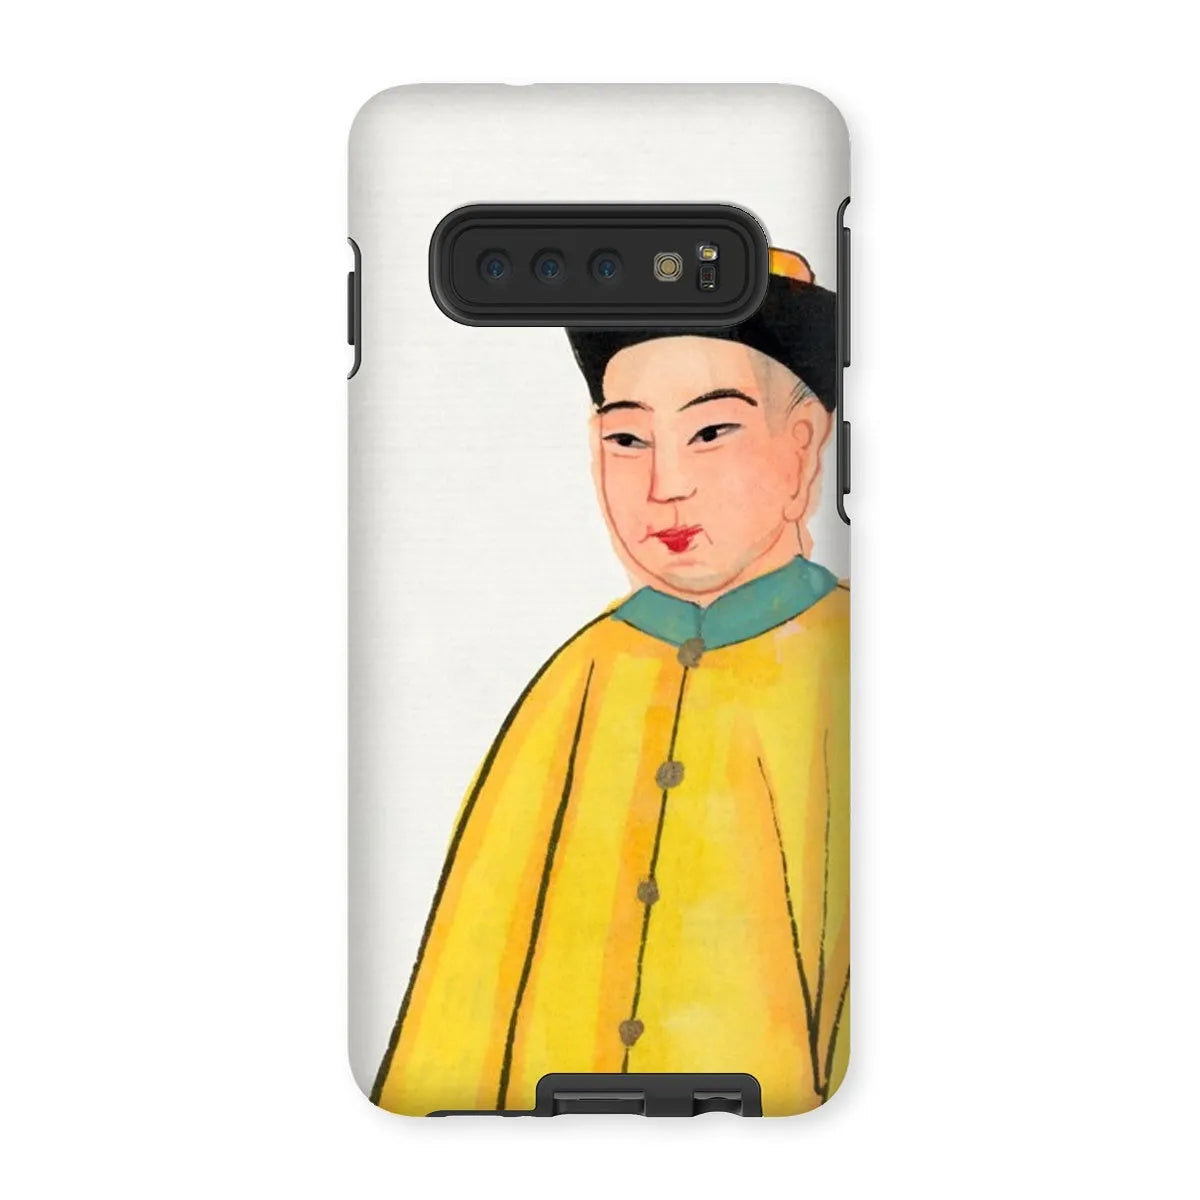 Priest In Yellow Robes - Chinese Aesthetic Art Phone Case - Samsung Galaxy S10 / Matte - Mobile Phone Cases - Aesthetic